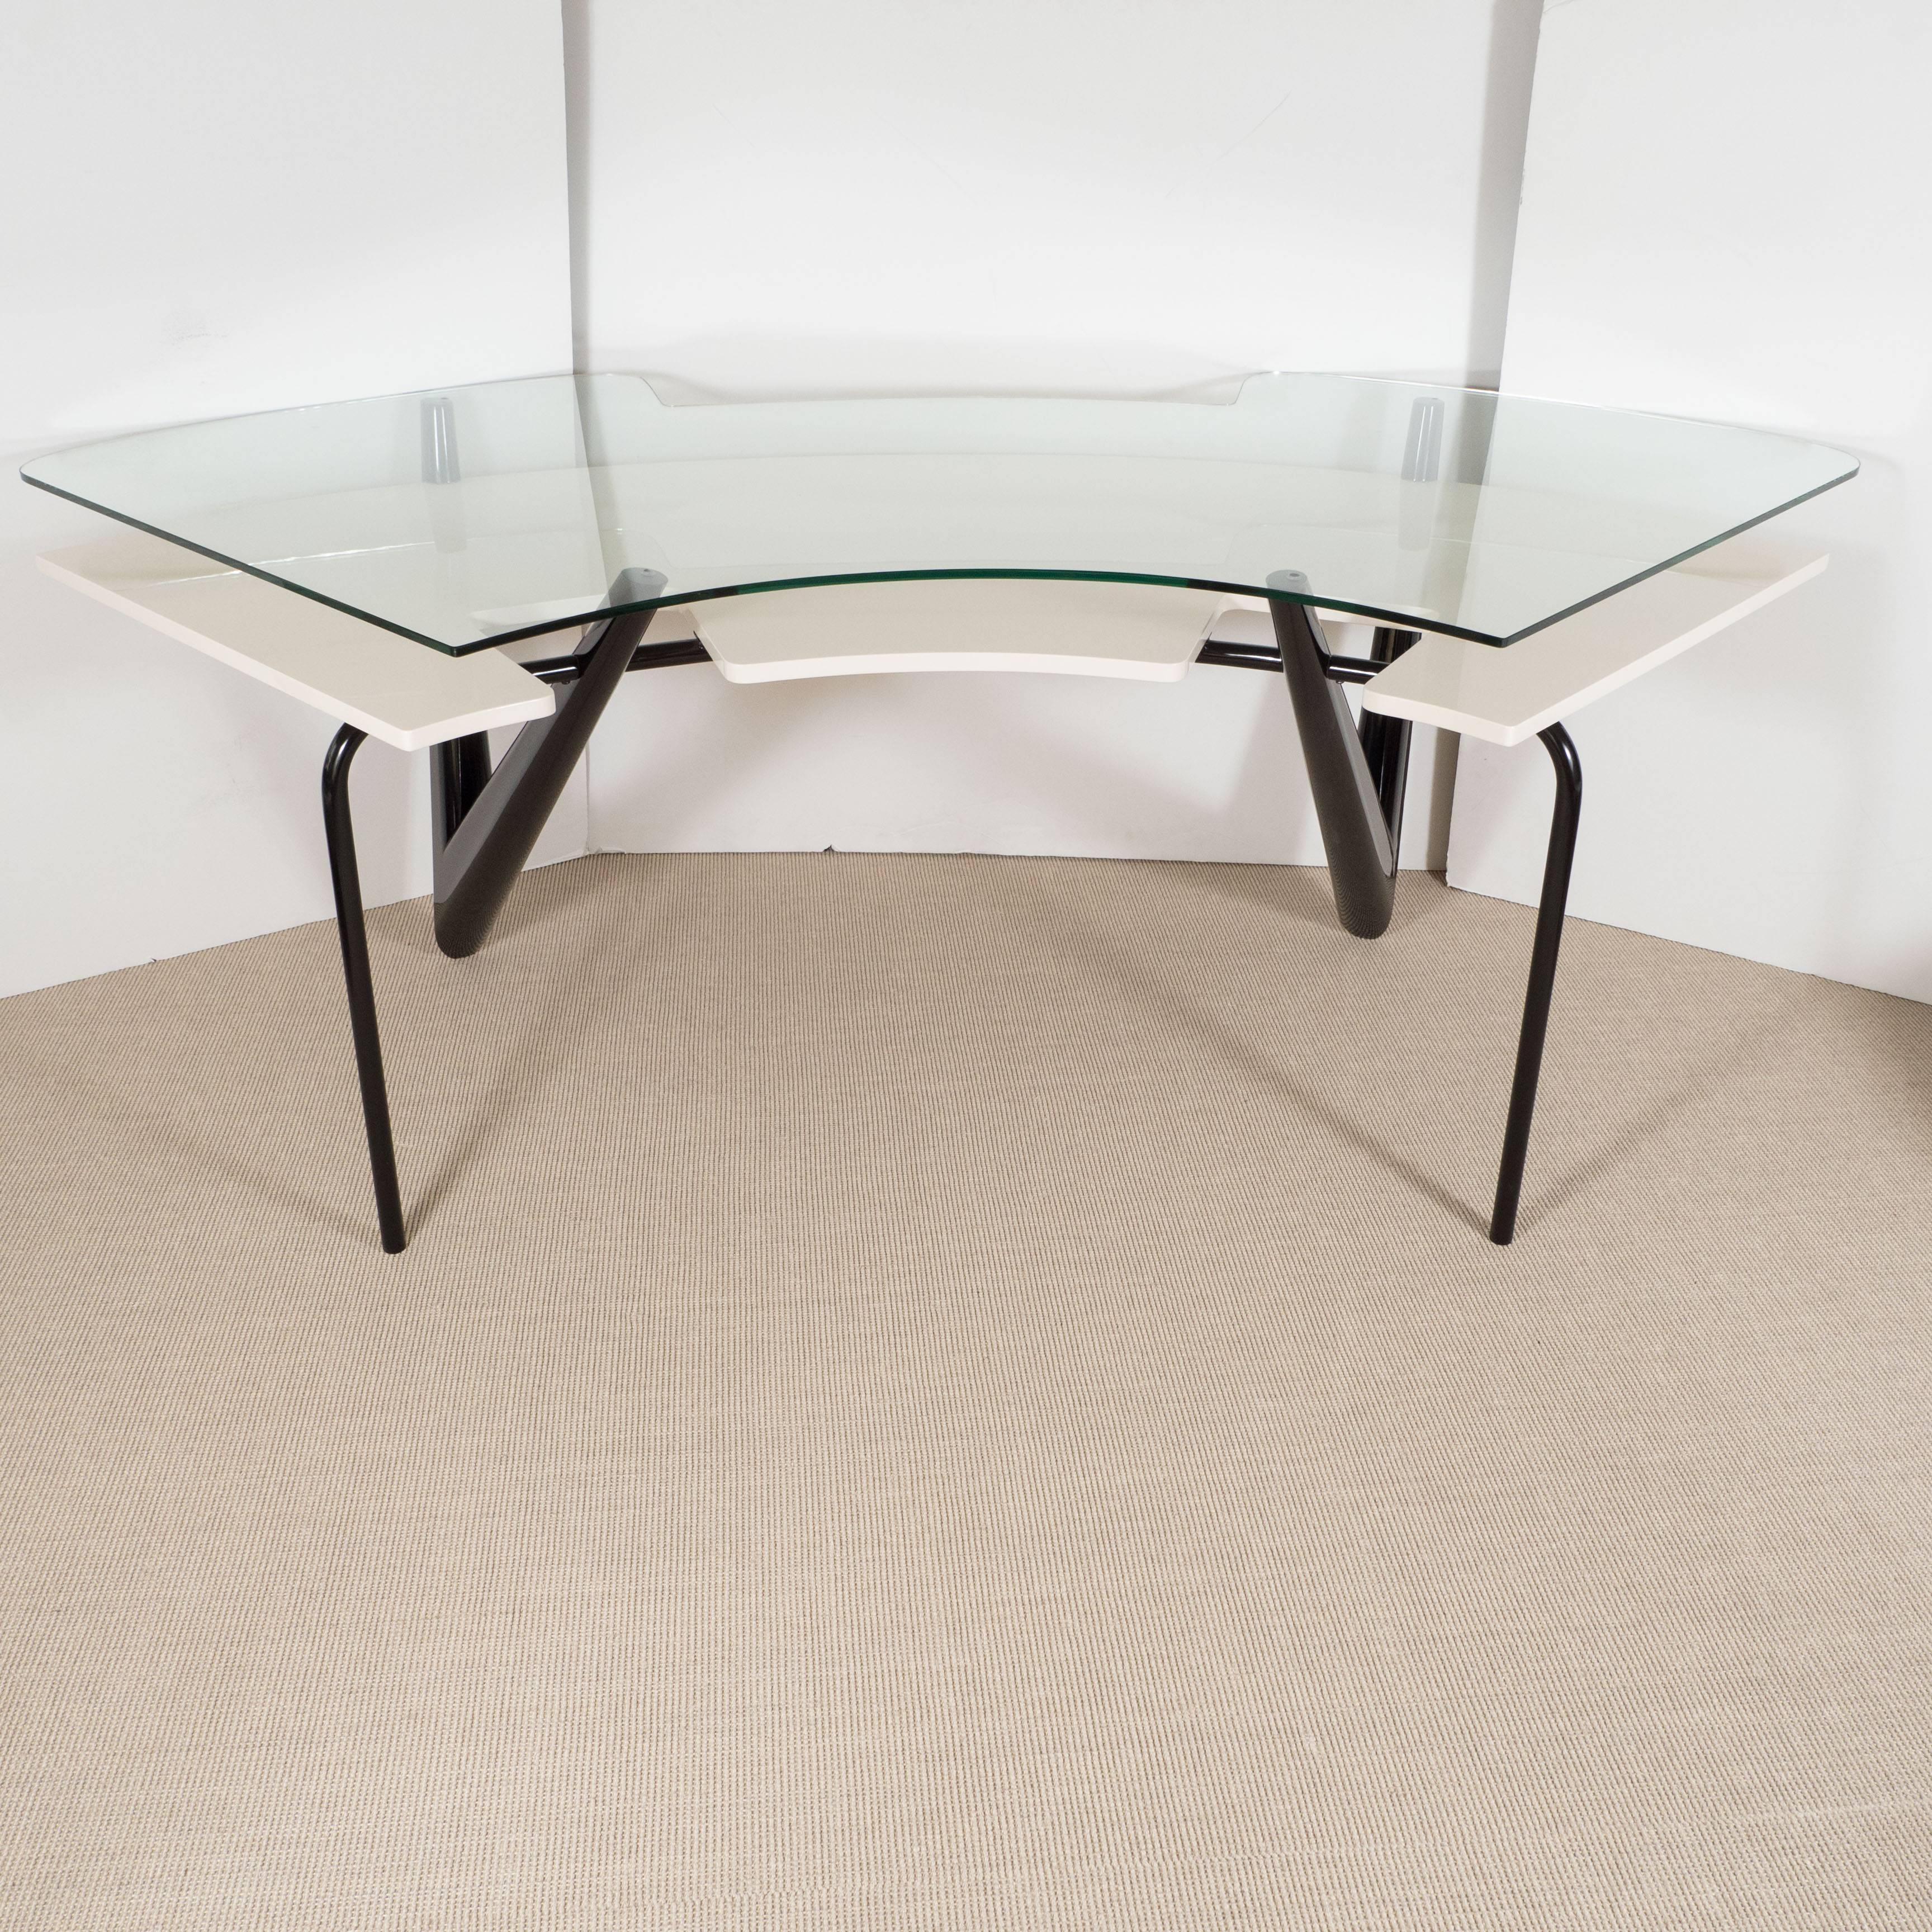 Osvaldo Borsani Style Desk In Excellent Condition For Sale In New York, NY